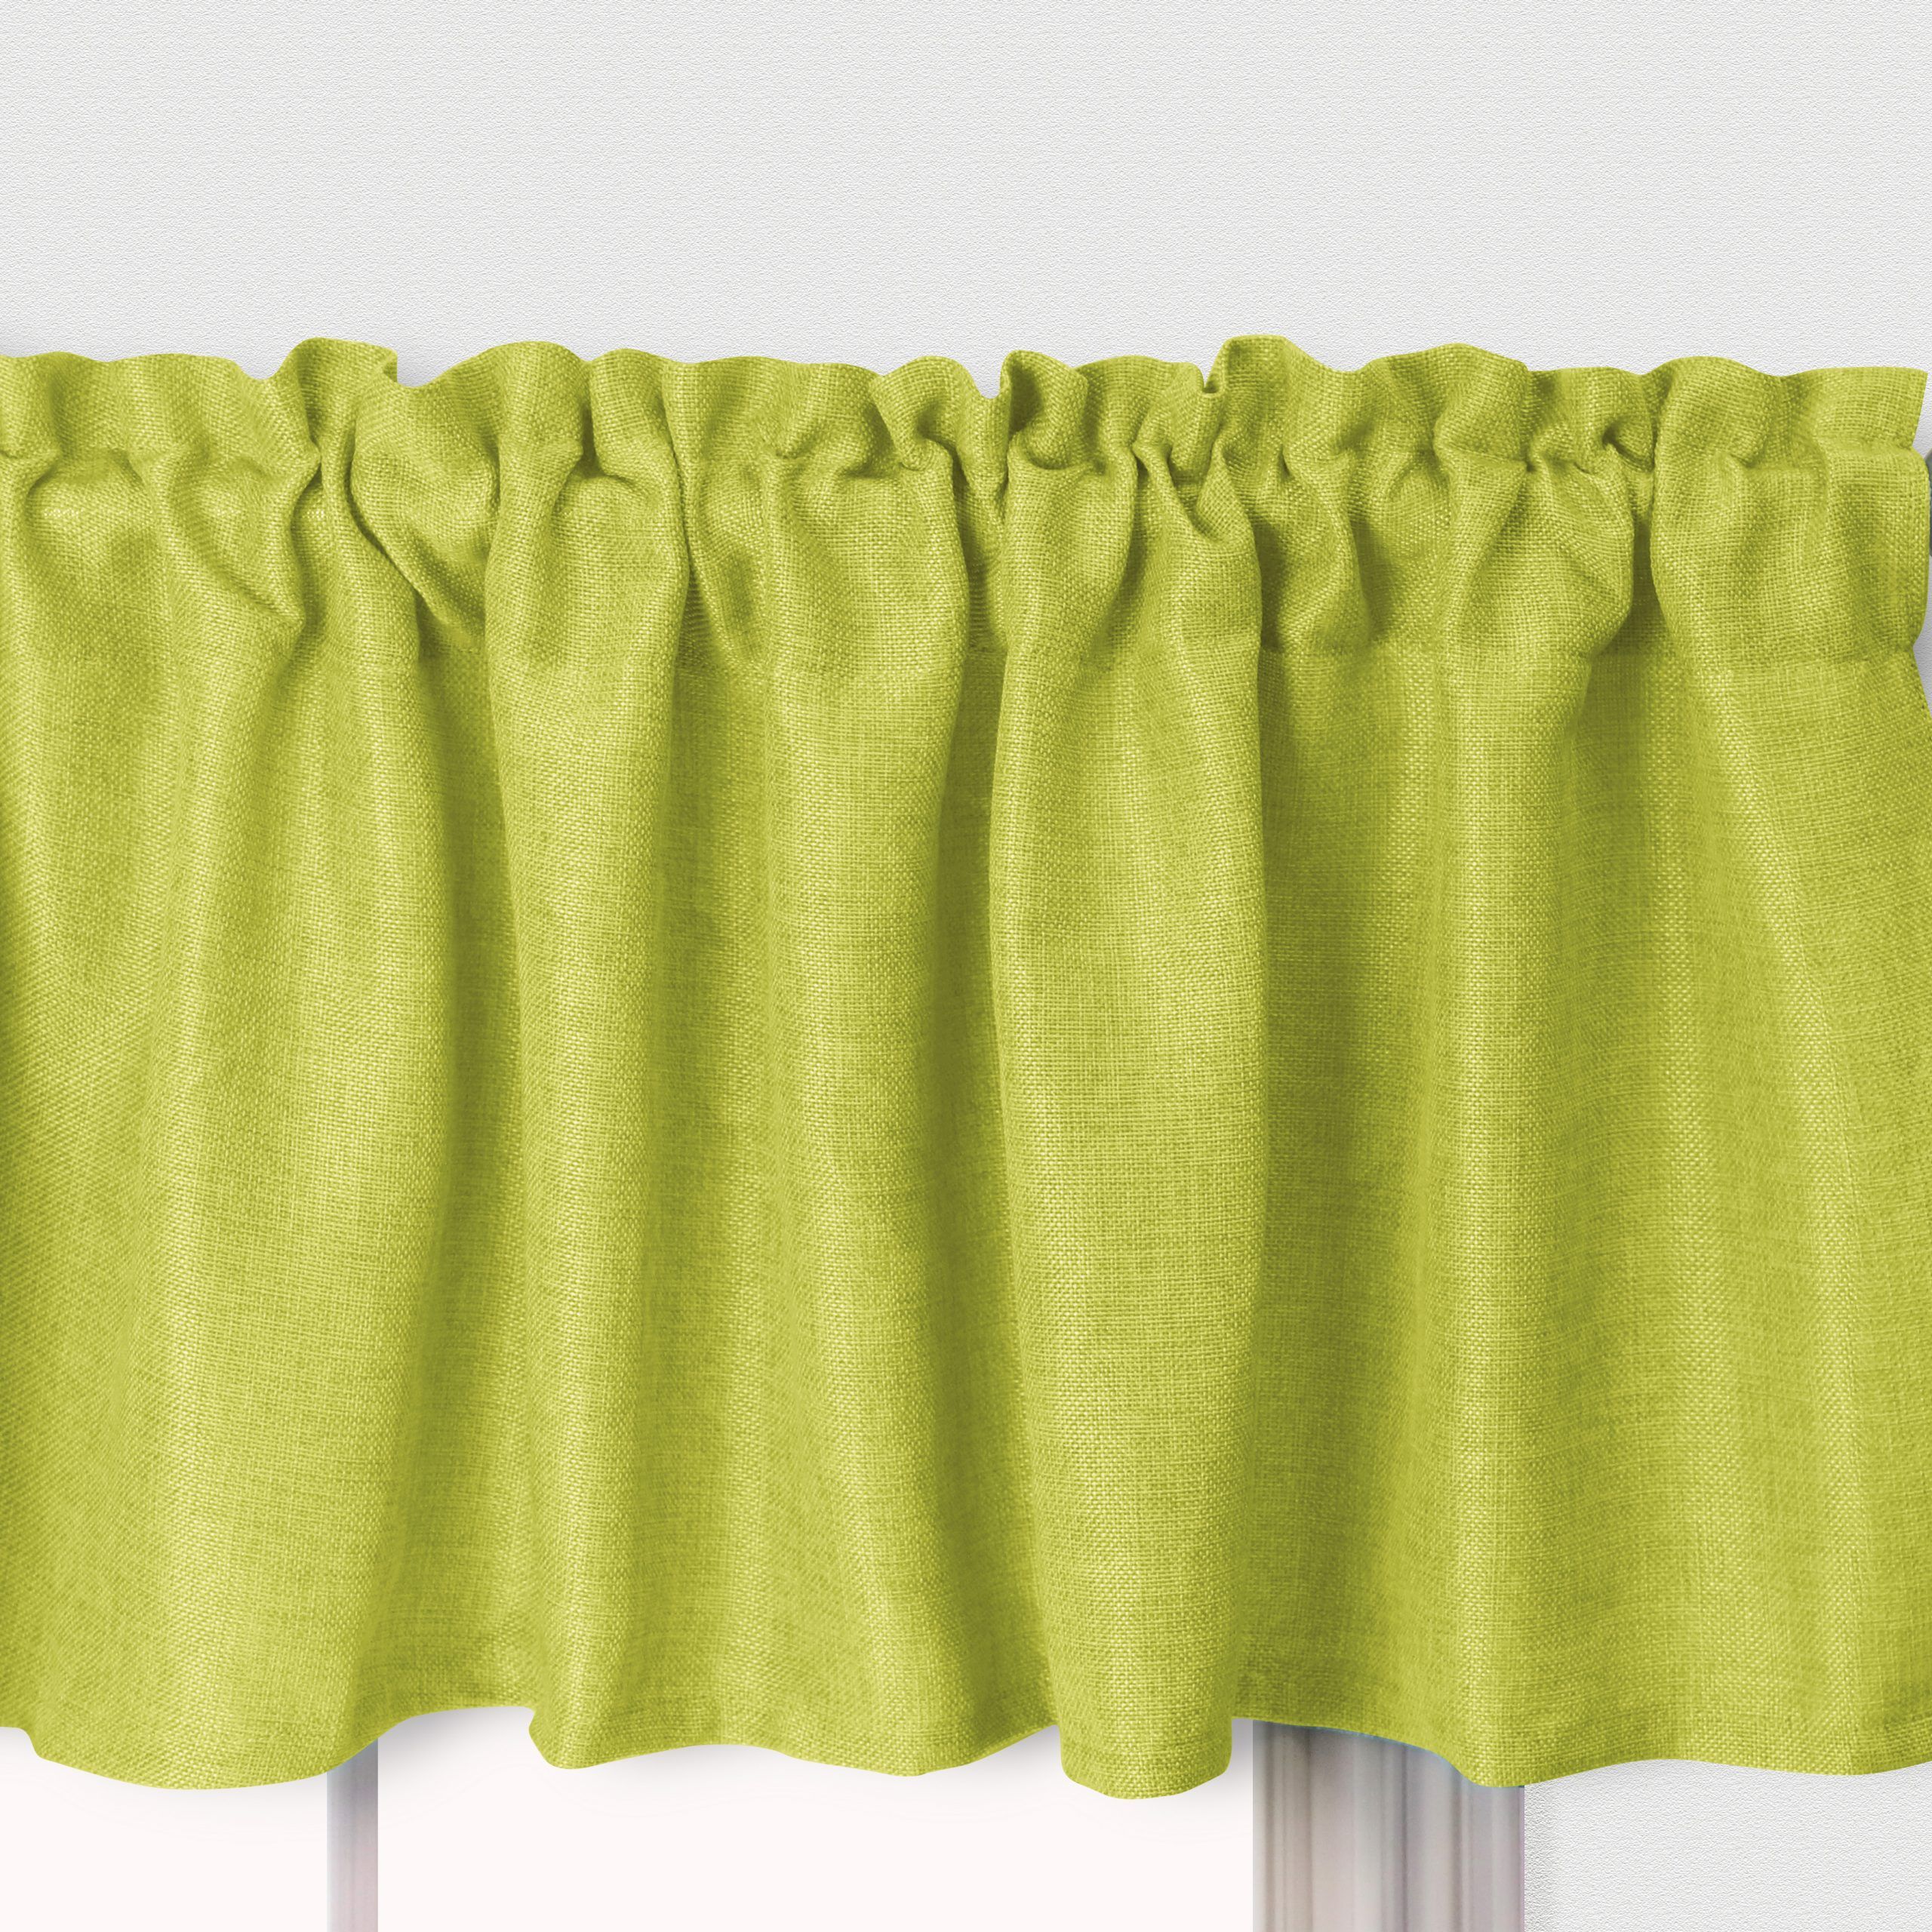 Aiking Home Pure 100% Faux Linen Window Valance – Size 56 With Regard To Hudson Pintuck Window Curtain Valances (View 15 of 20)